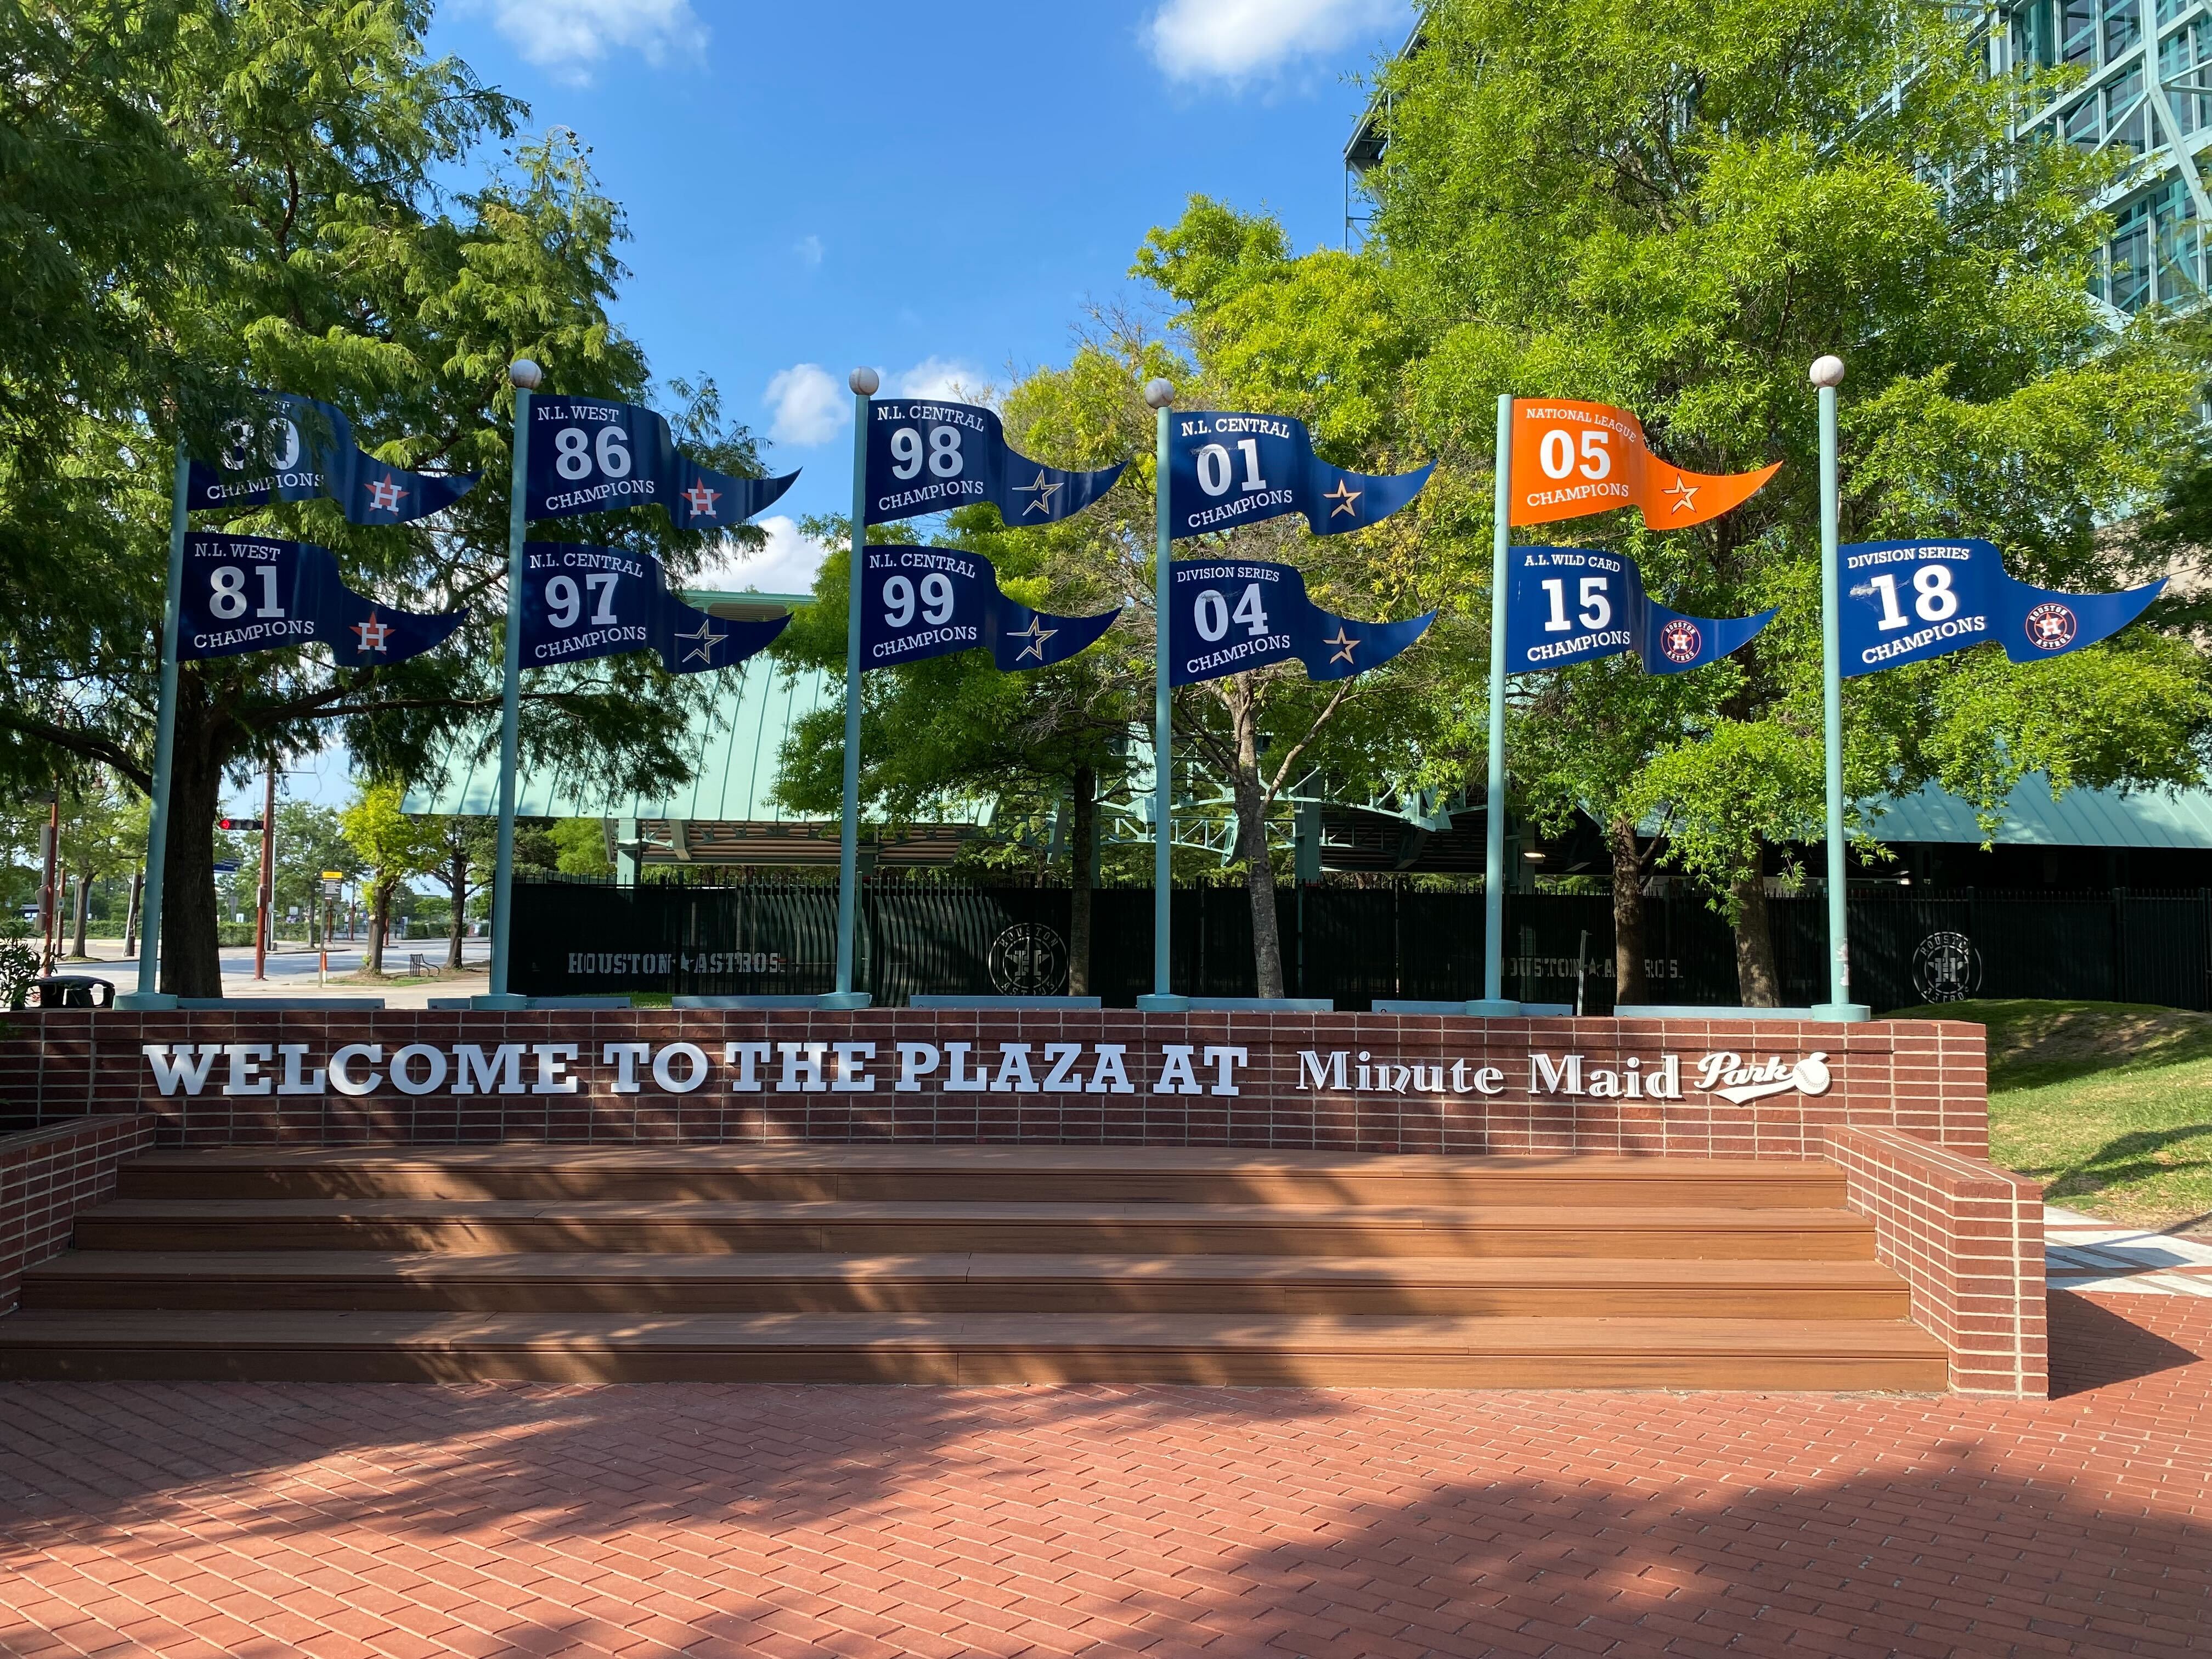 2017 Houston Astros World Series banner missing from Minute Maid Park plaza